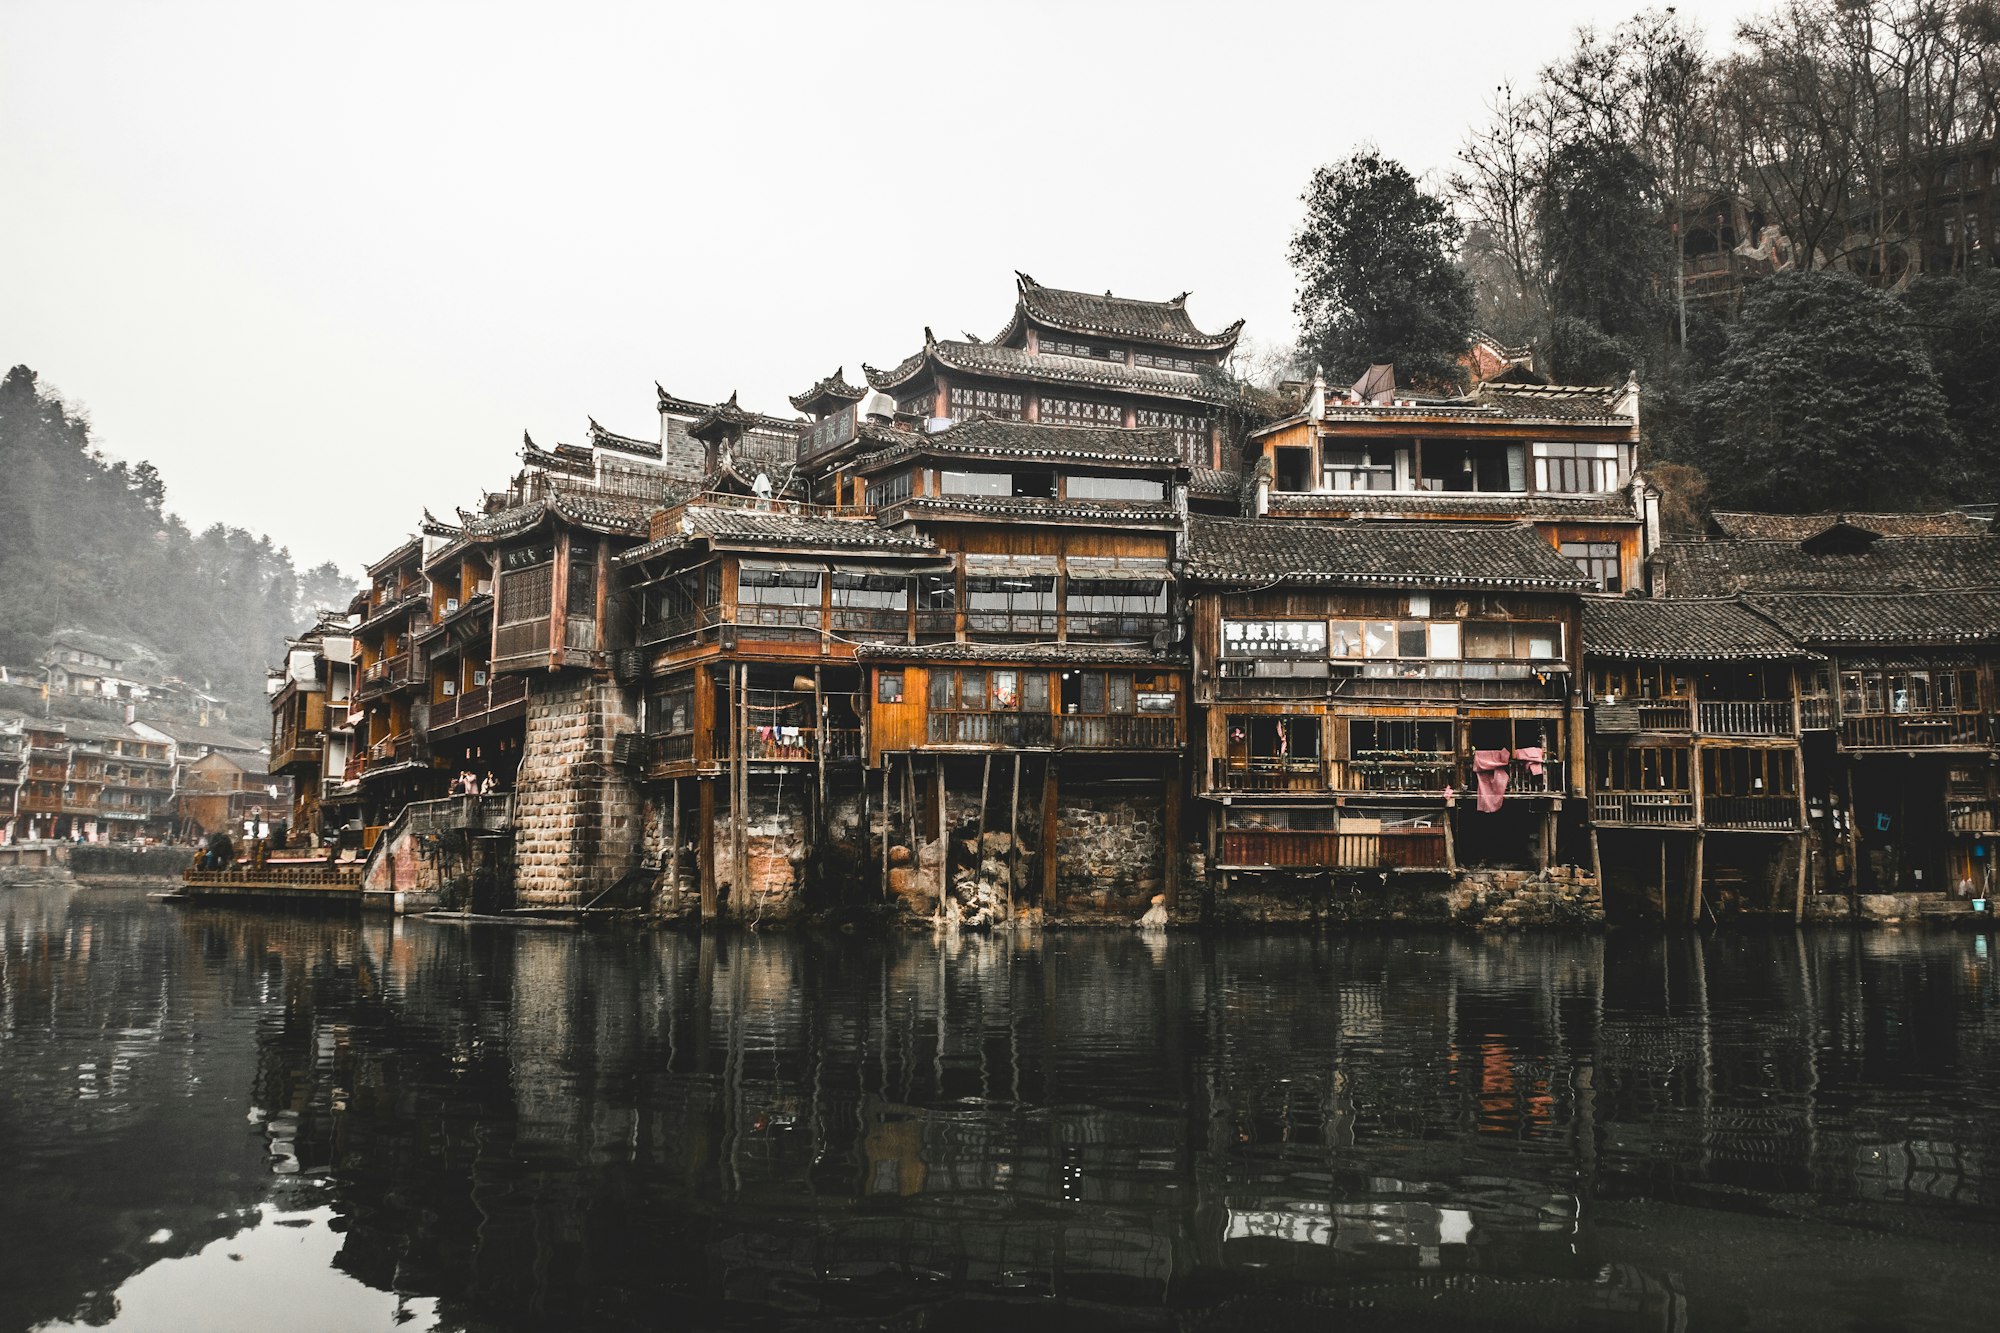 The owner of the hostel I was staying at in Fenghuang showed me the highlights and points of interests on a map of the old town. According to him, this was the “Instagram place”.